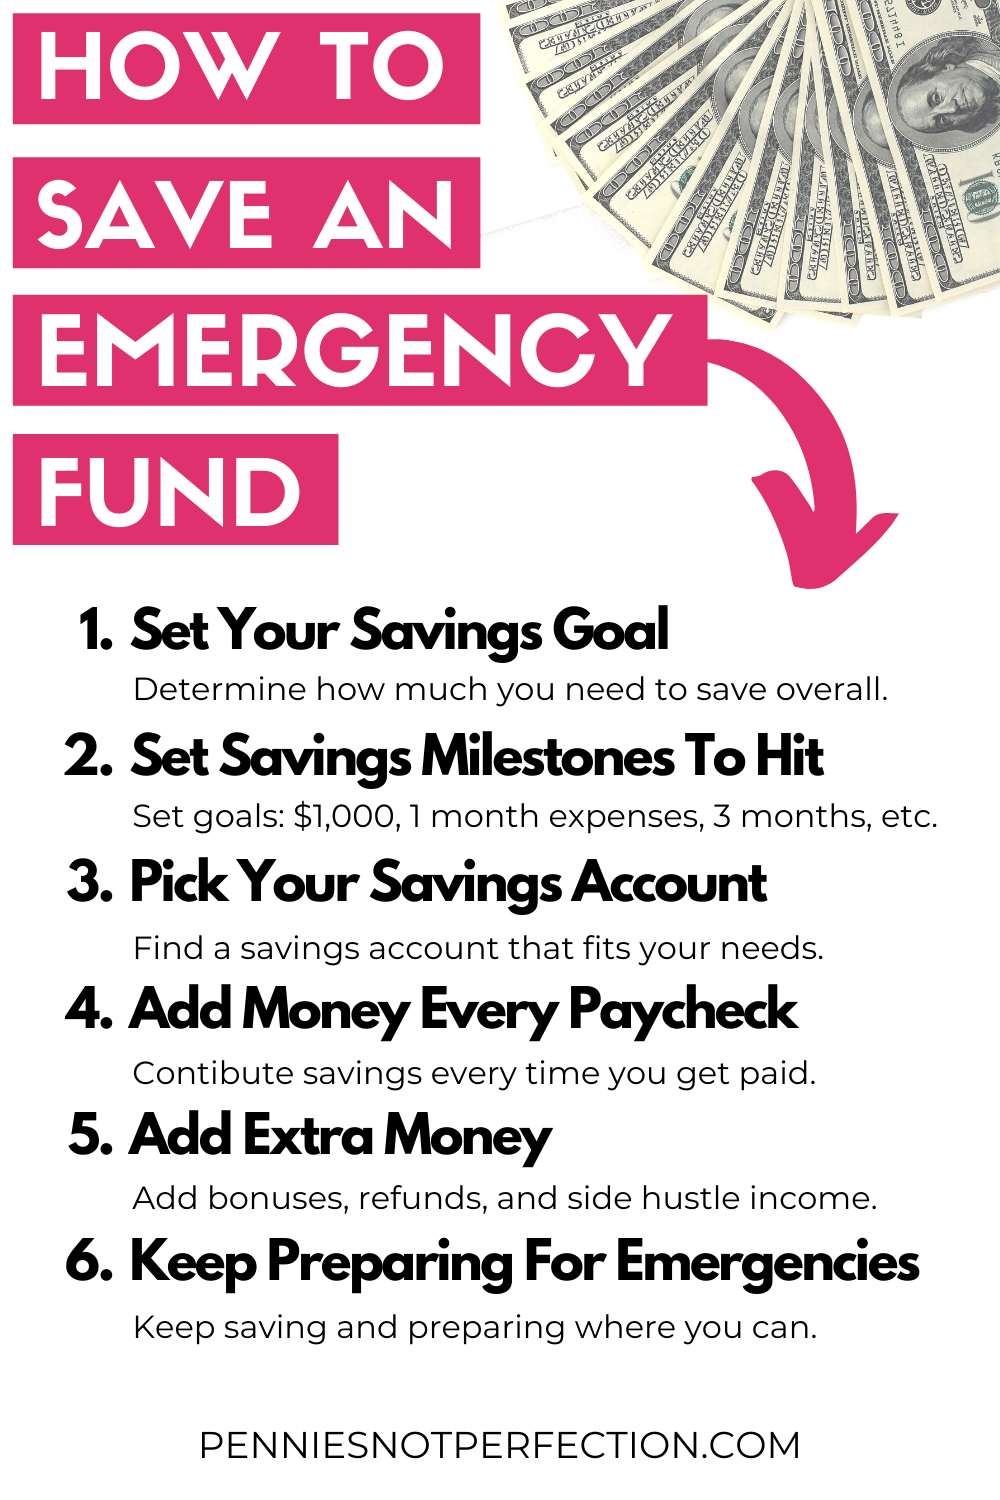 “Understanding the Basics of Emergency Loans: How to Access Funds Quickly”